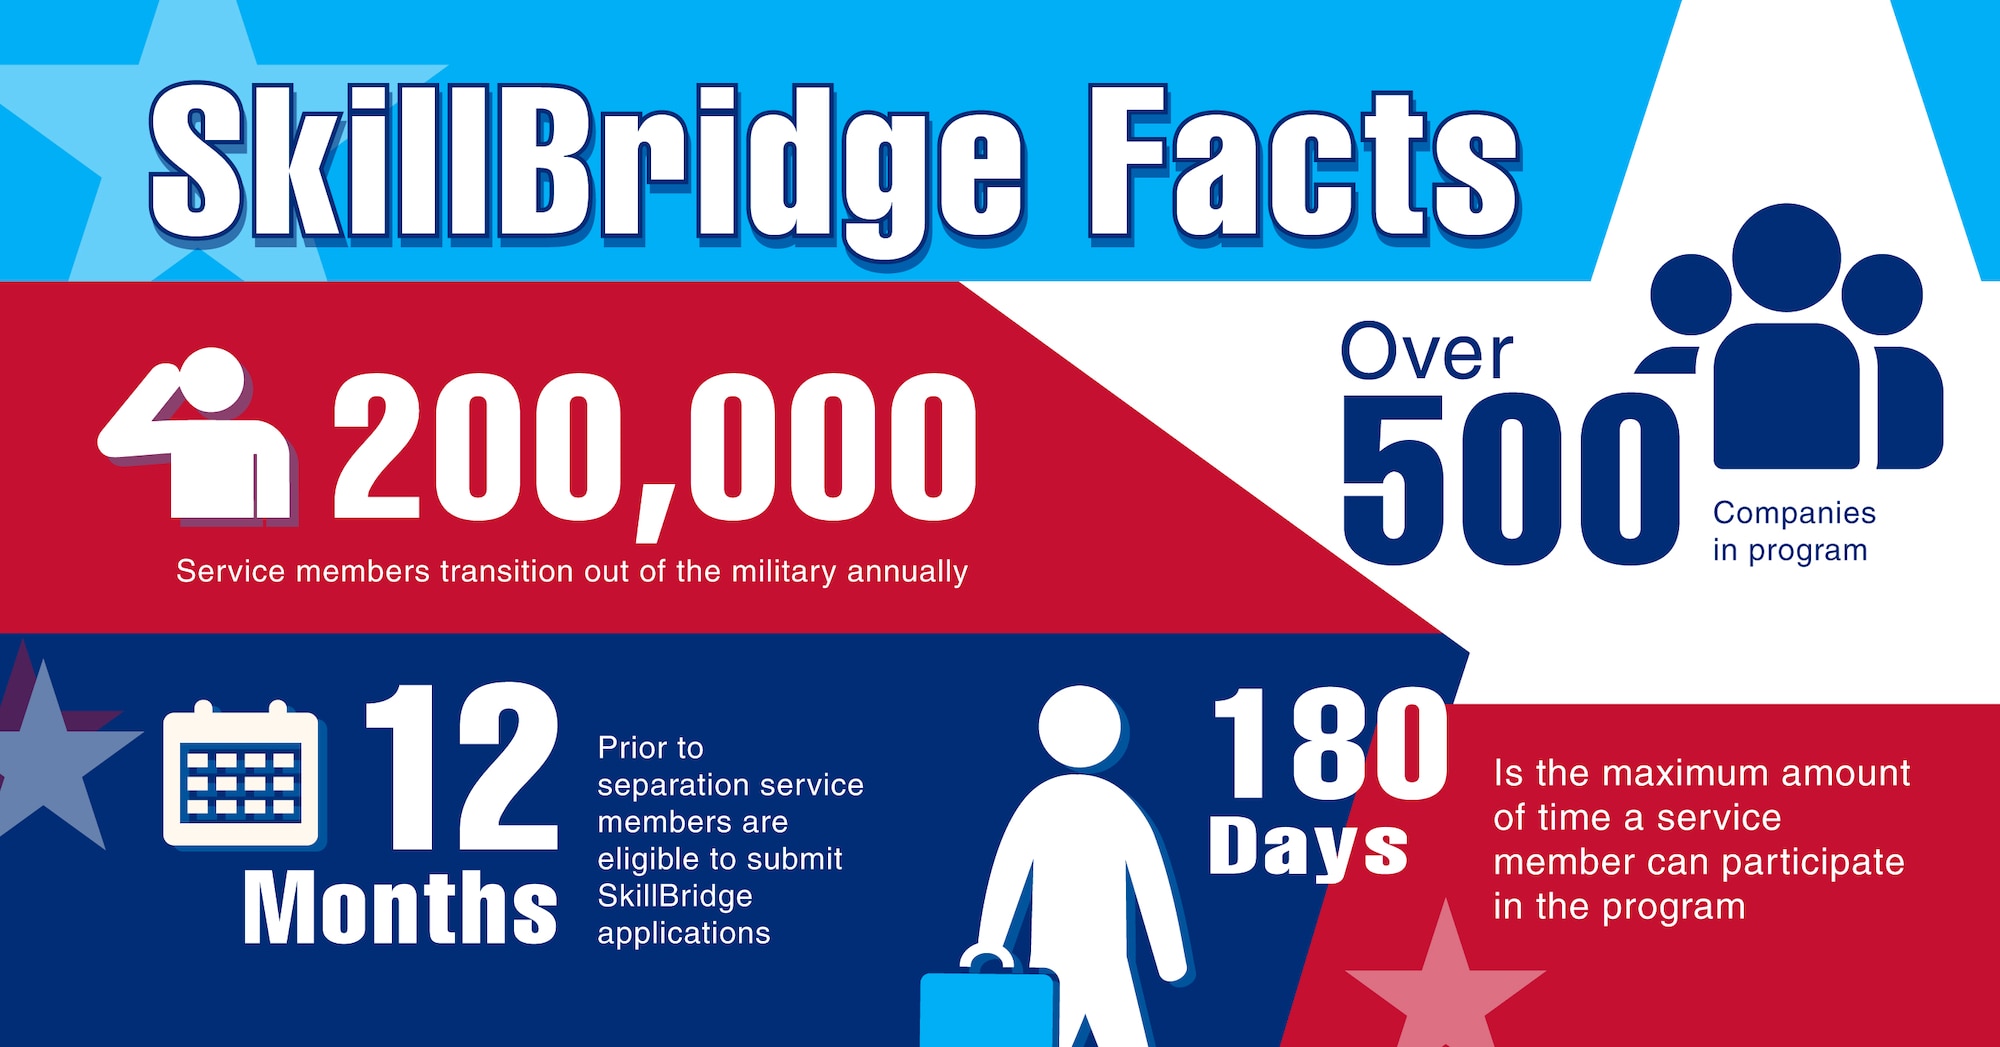 The Department of Defense SkillBridge program offers separating service members with opportunities to complete apprenticeships or internships with civilian organizations up to six months before their separation. More than 500 companies participate in the program. (U.S. Space Force graphic by Michael Frye)